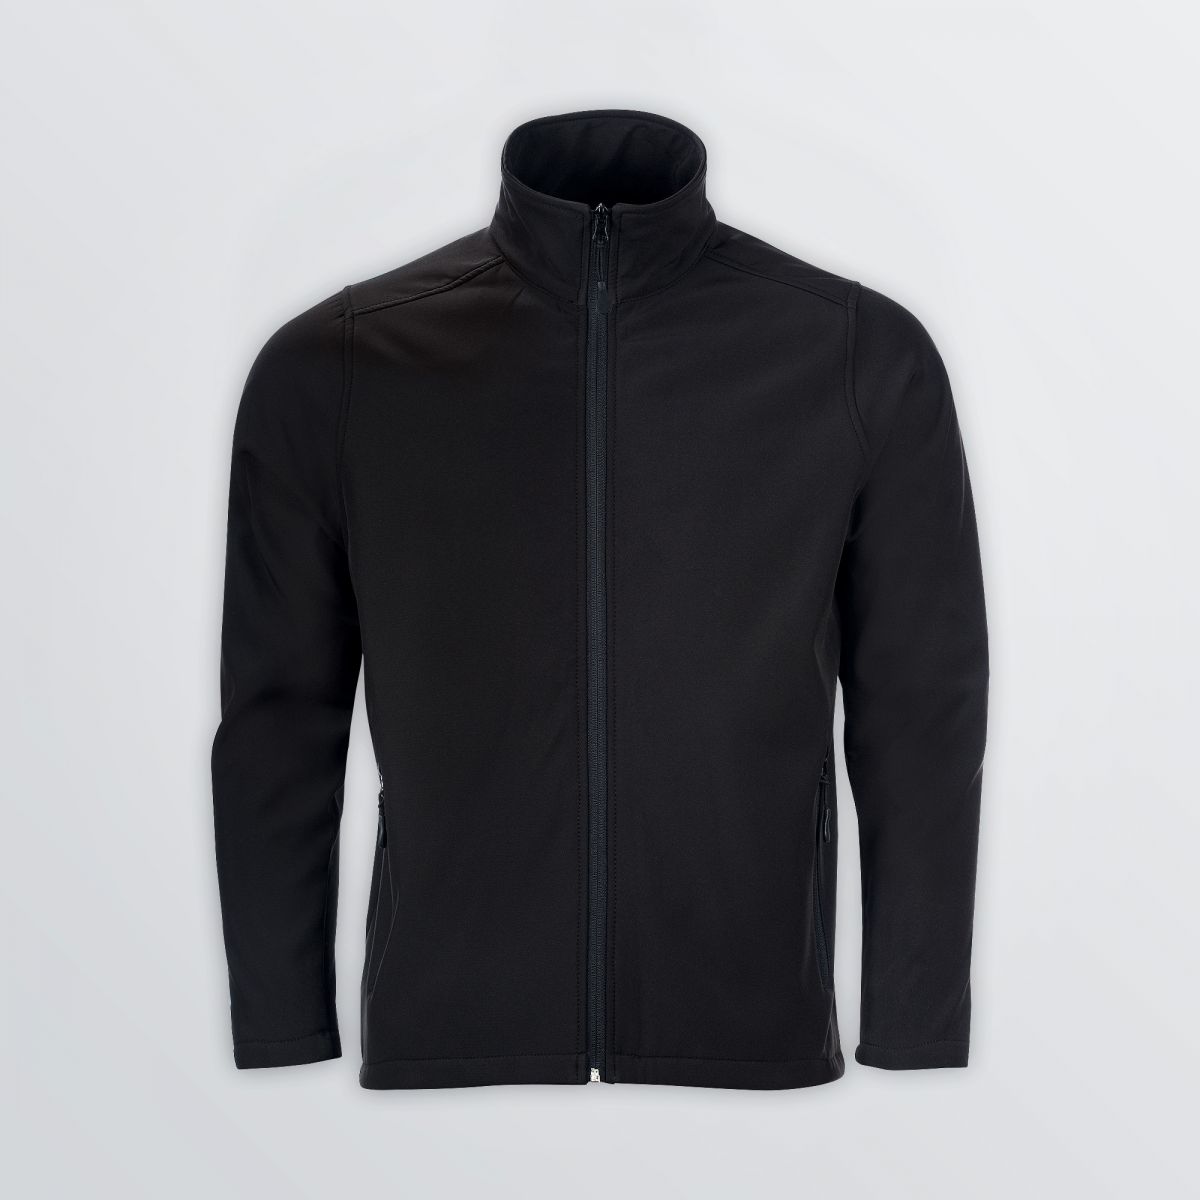 wind and water resitsant Basic Softshell Jacket for customisation in black colour example - front view